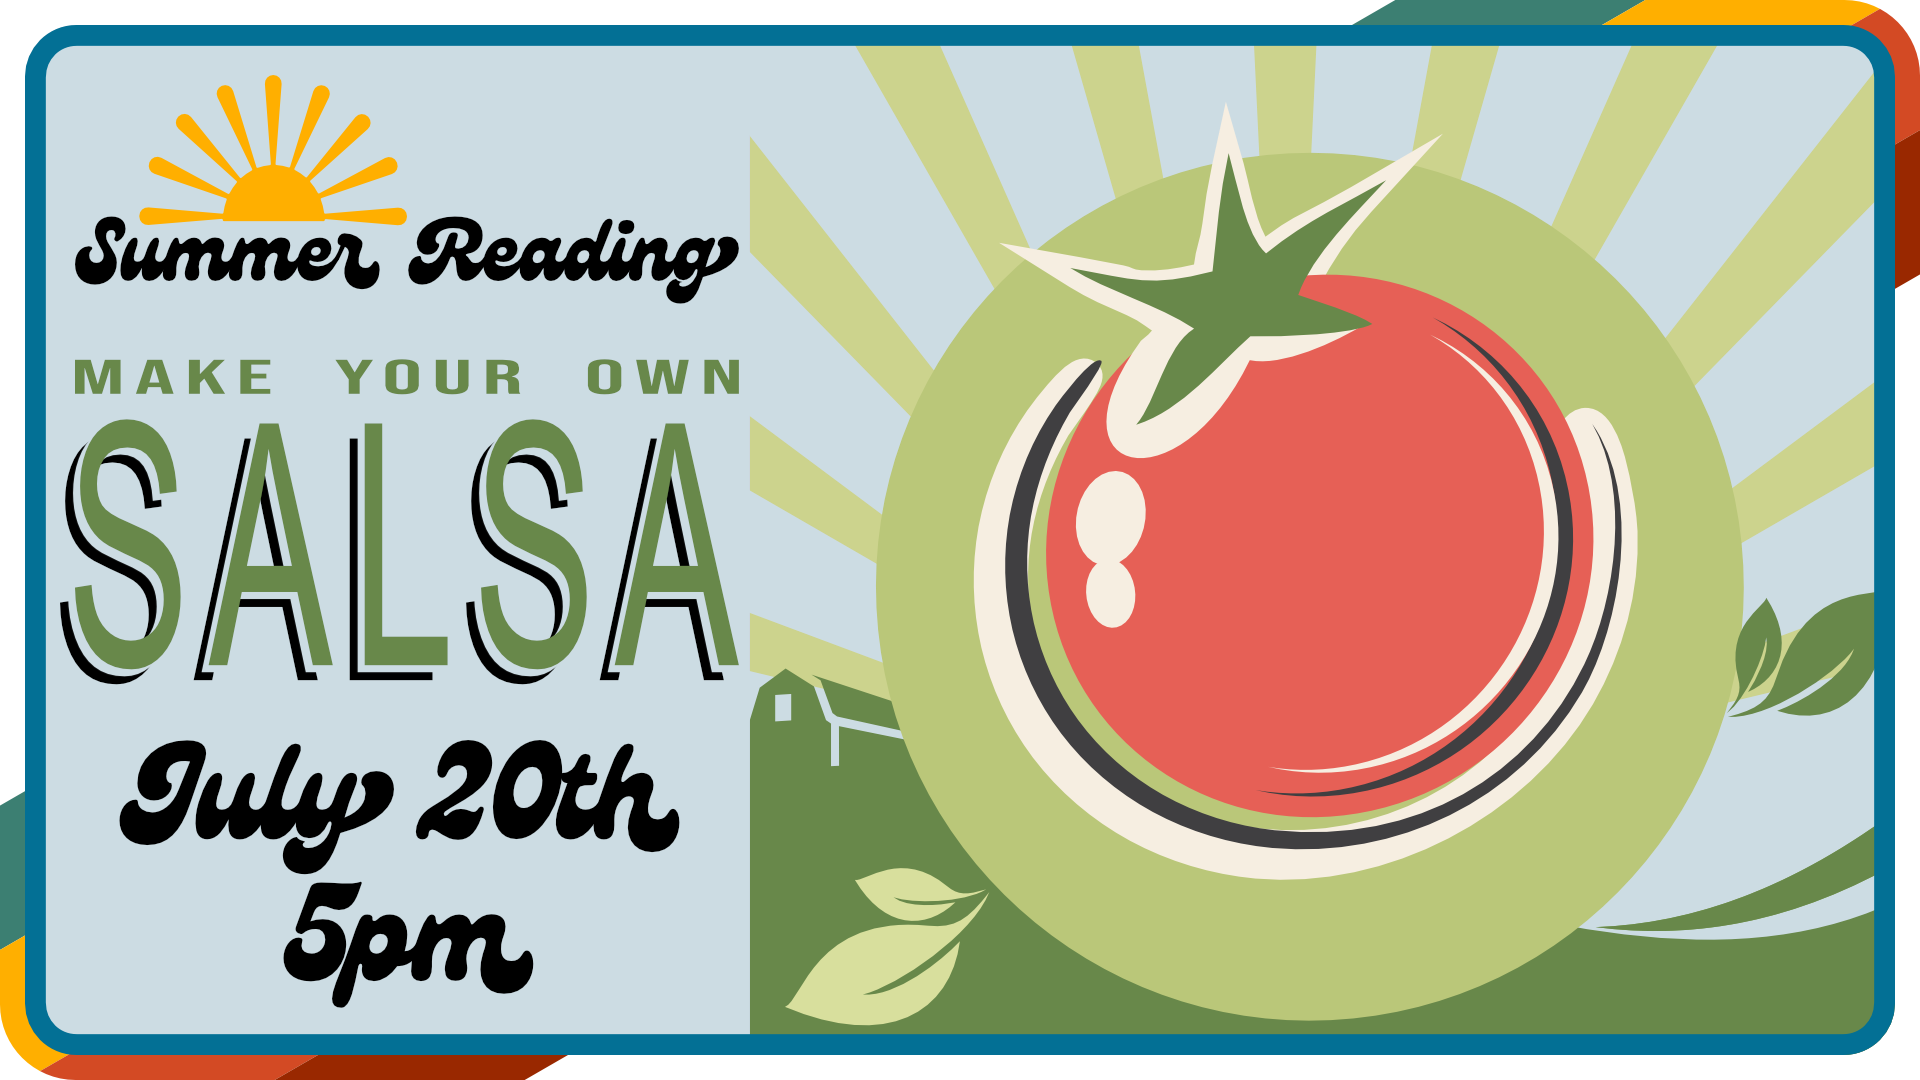 Summer Reading Make Your Own Salsa, July 20th at 5pm